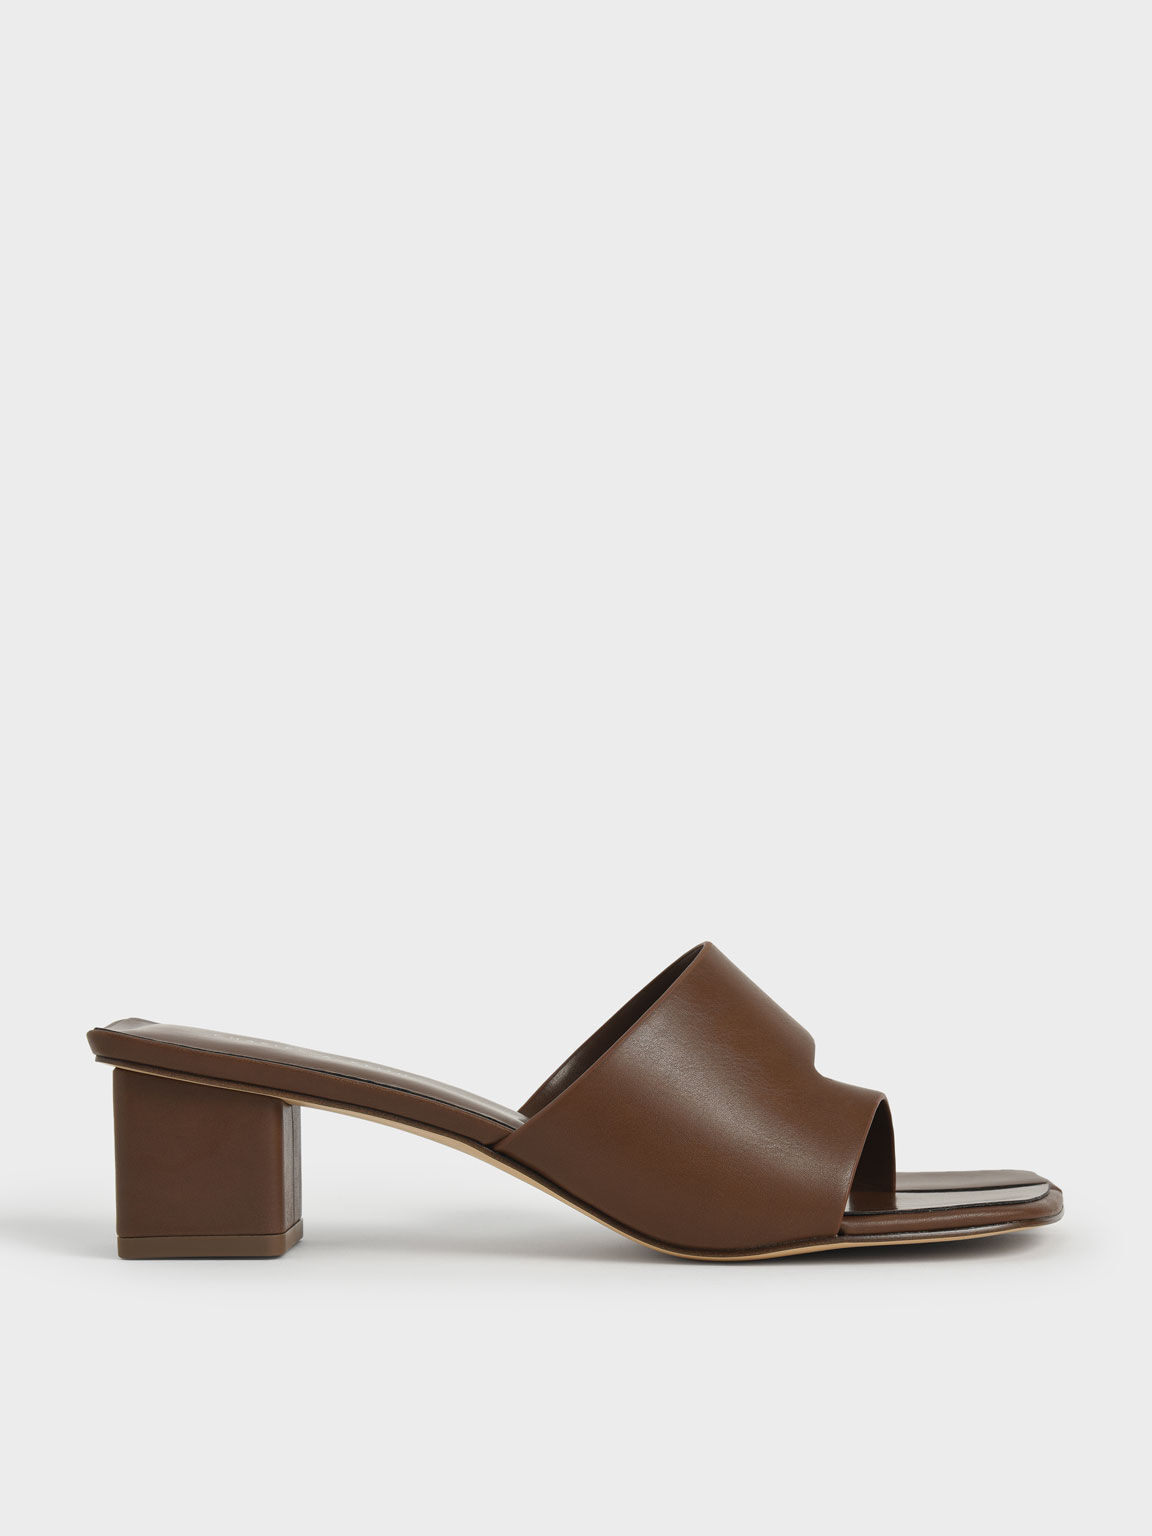 Cut-Out Thong Sandals, Brown, hi-res